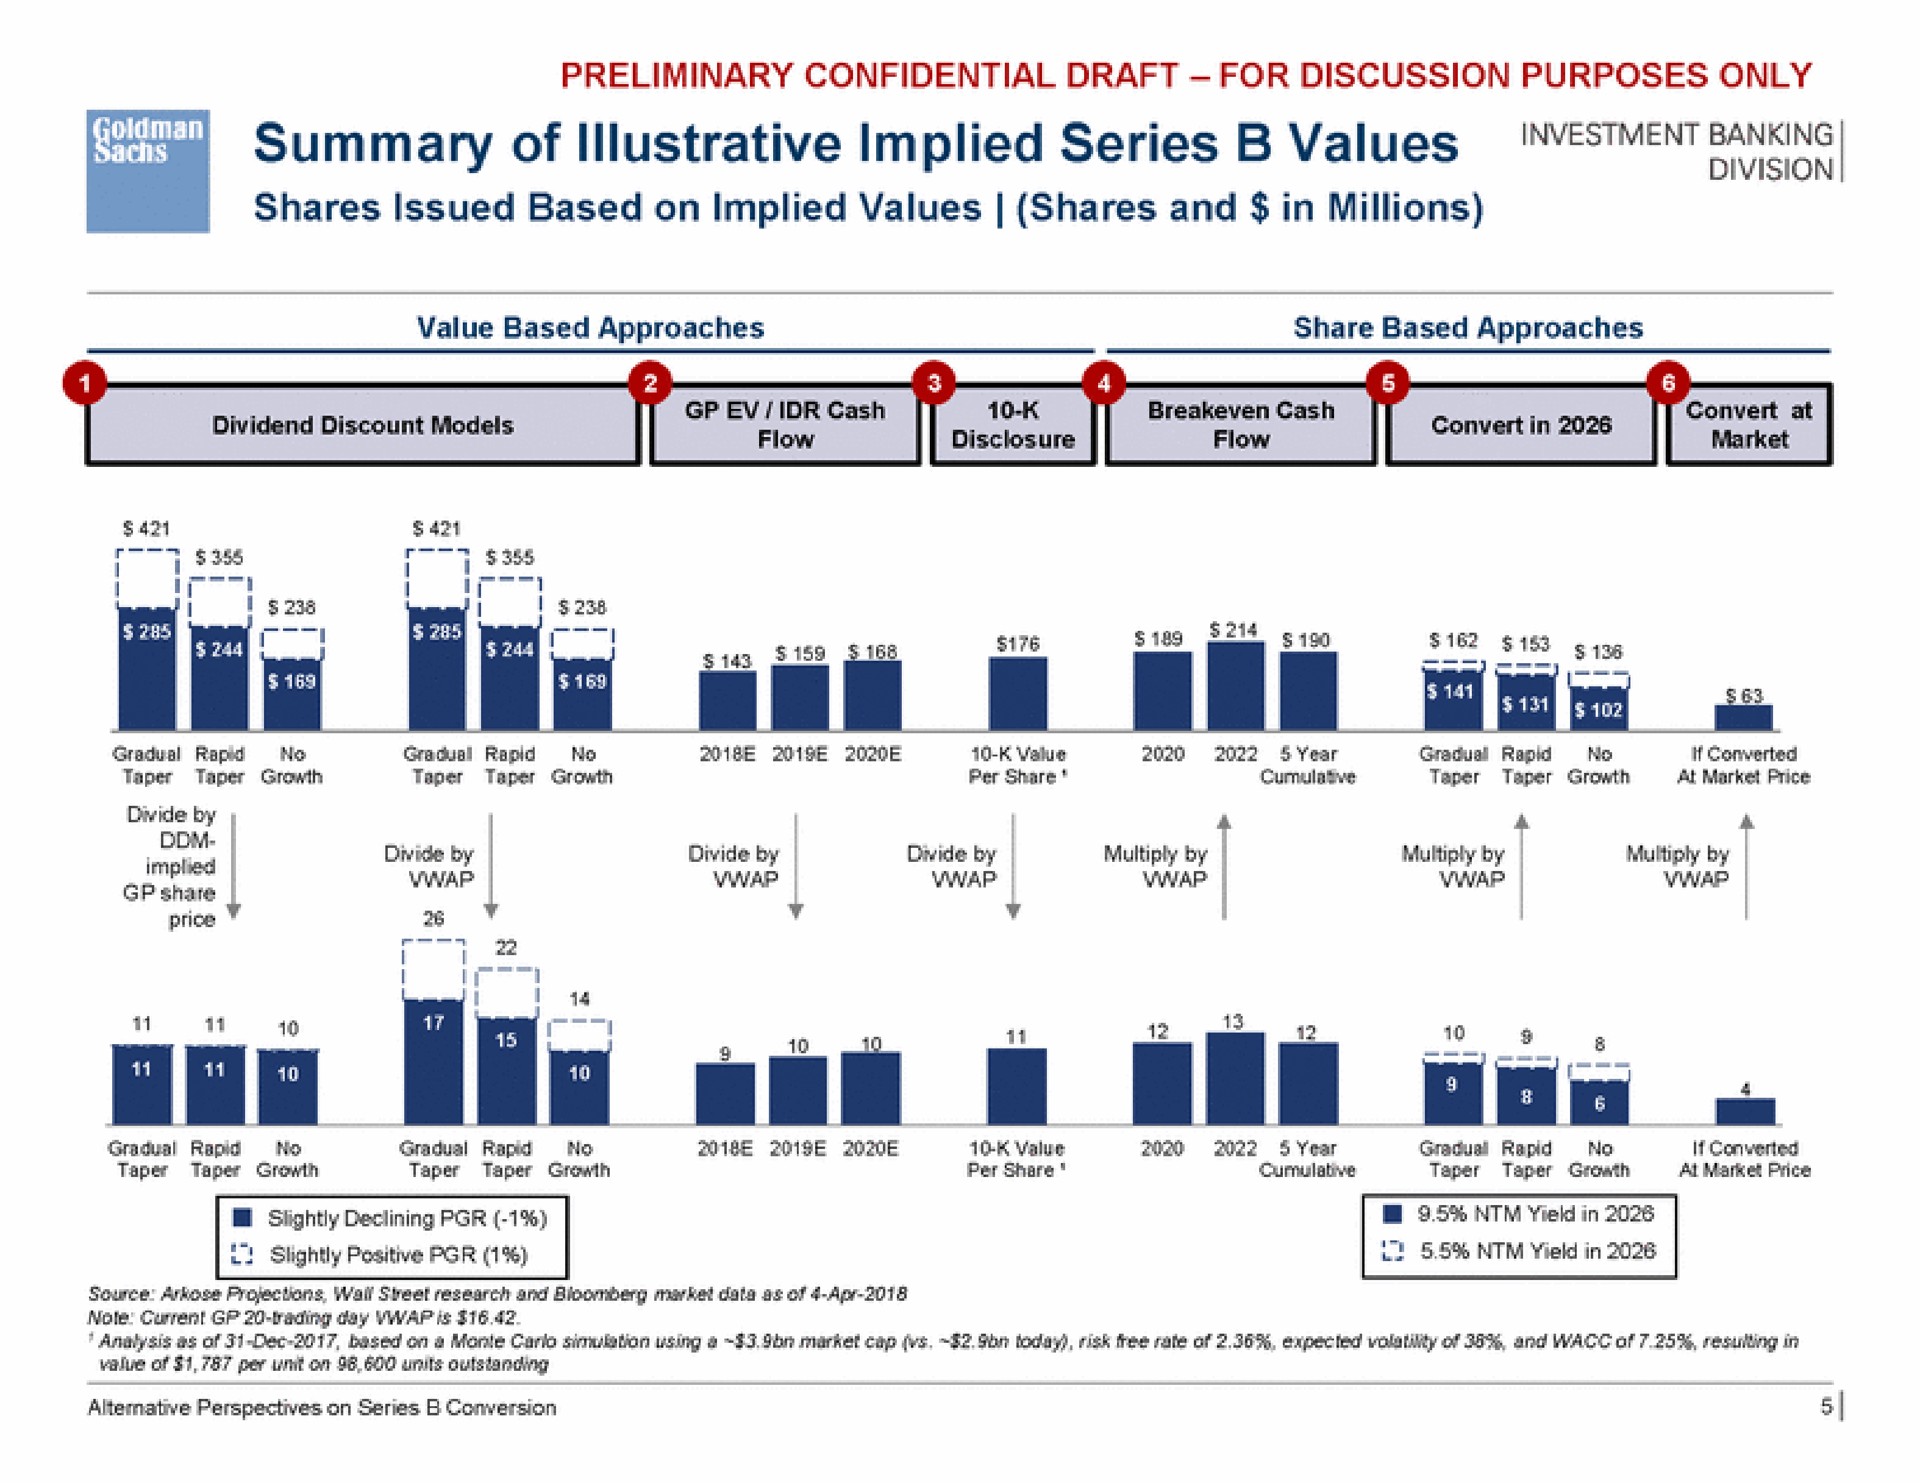 a summary of illustrative implied series values banking bag ins | Goldman Sachs